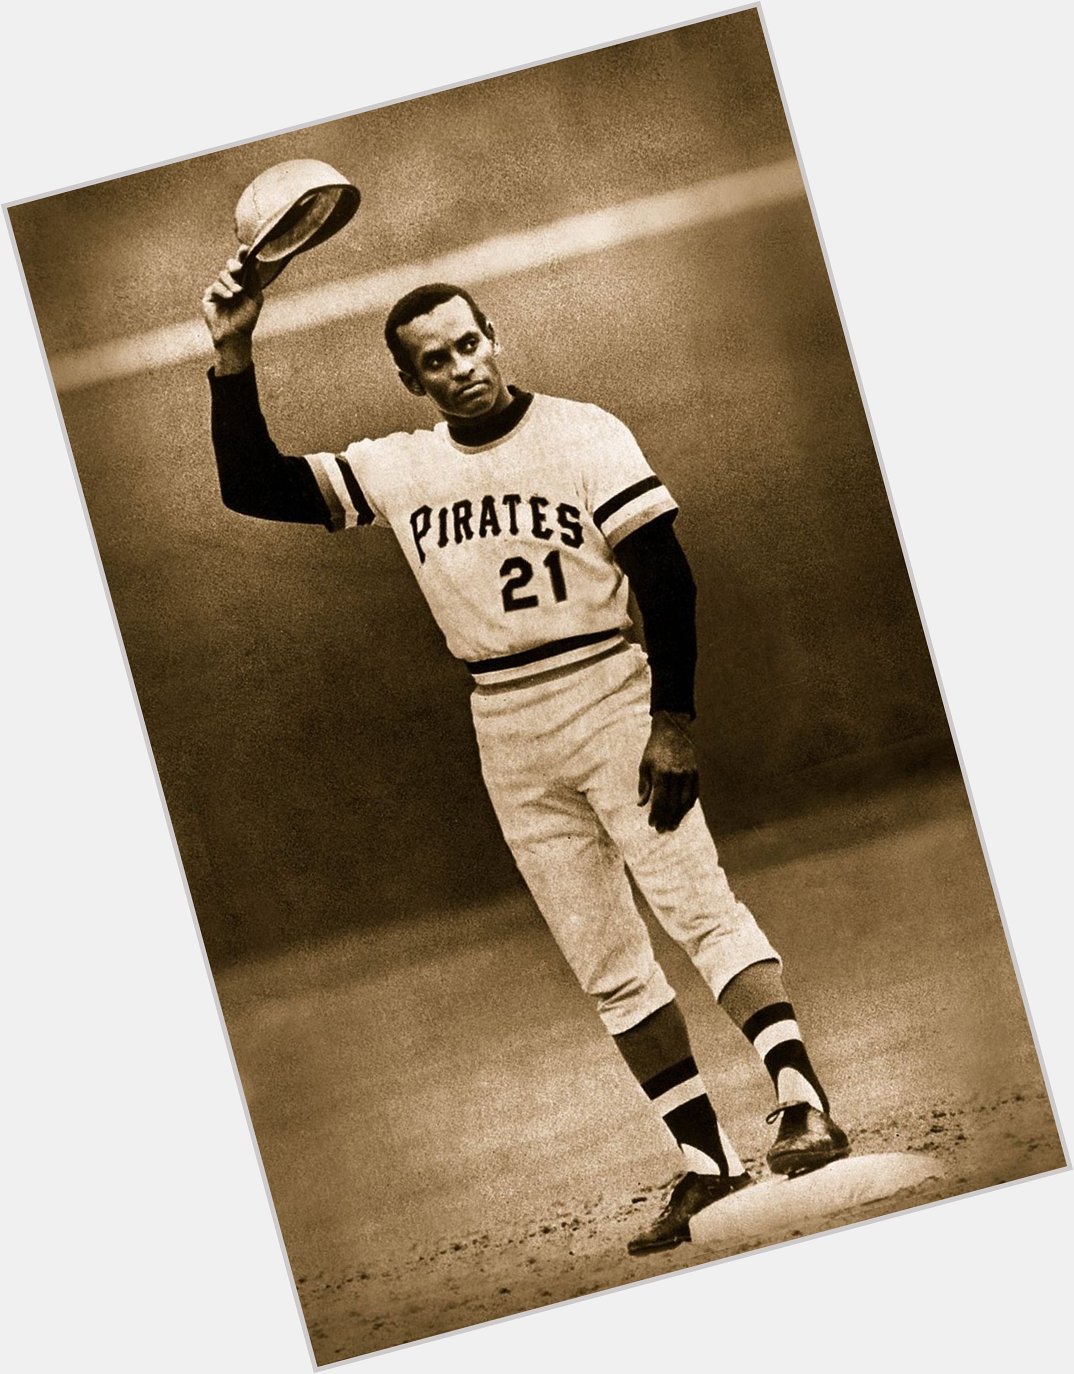 Happy birthday to The Great One! We might all strive to be the kind of person Roberto Clemente was off the field. 